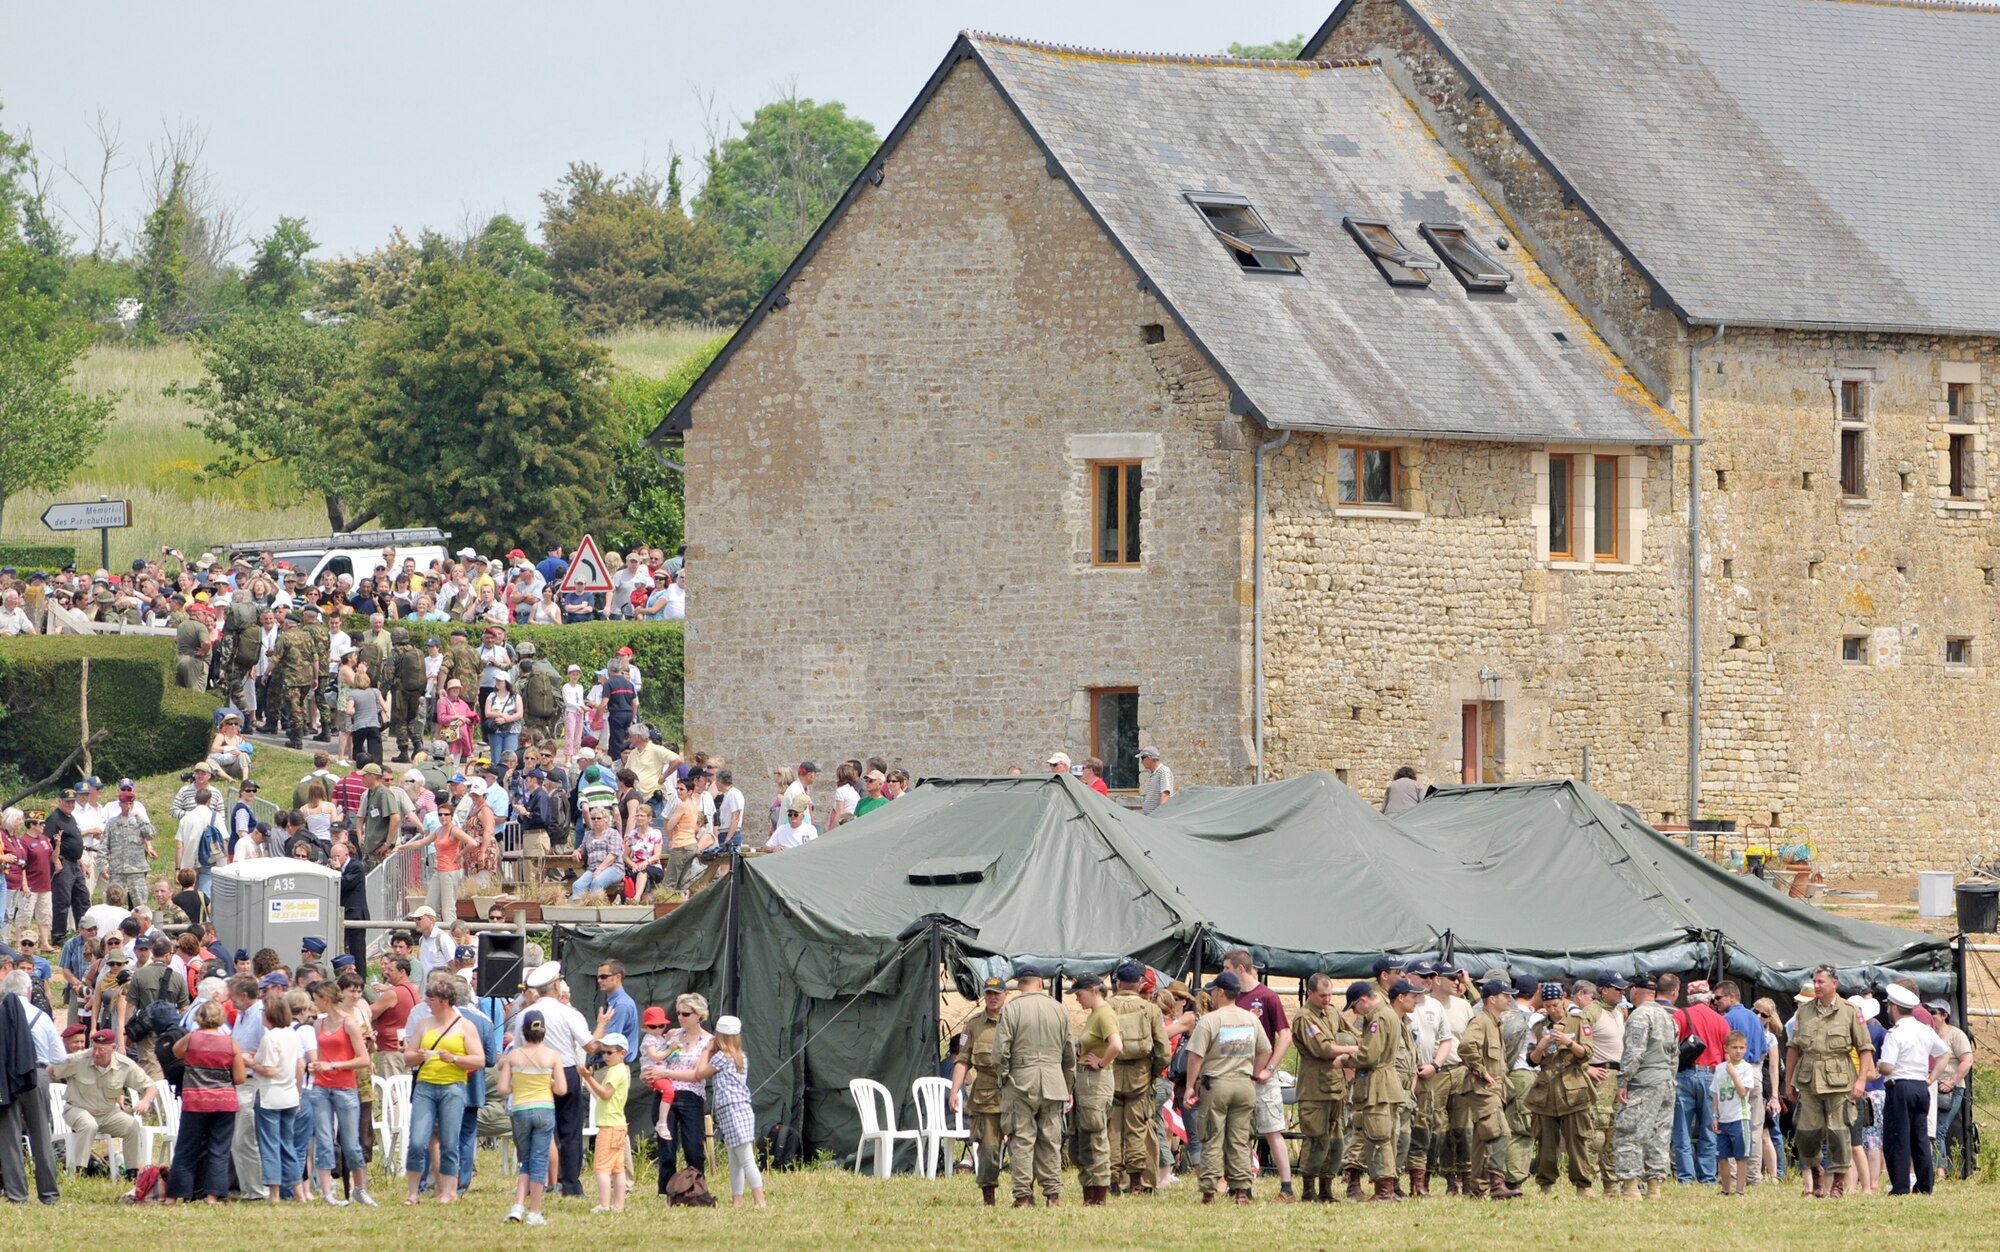 A crowd of spectators gathers to watch multinational paratroopers jump into the famous "Iron Mike" drop zone June 5, 2010, in Normandy, France. The jump was part of a ceremony commemorating the 66th anniversary of D-Day. (U.S. Air Force photo/Staff Sgt. Austin M. May)